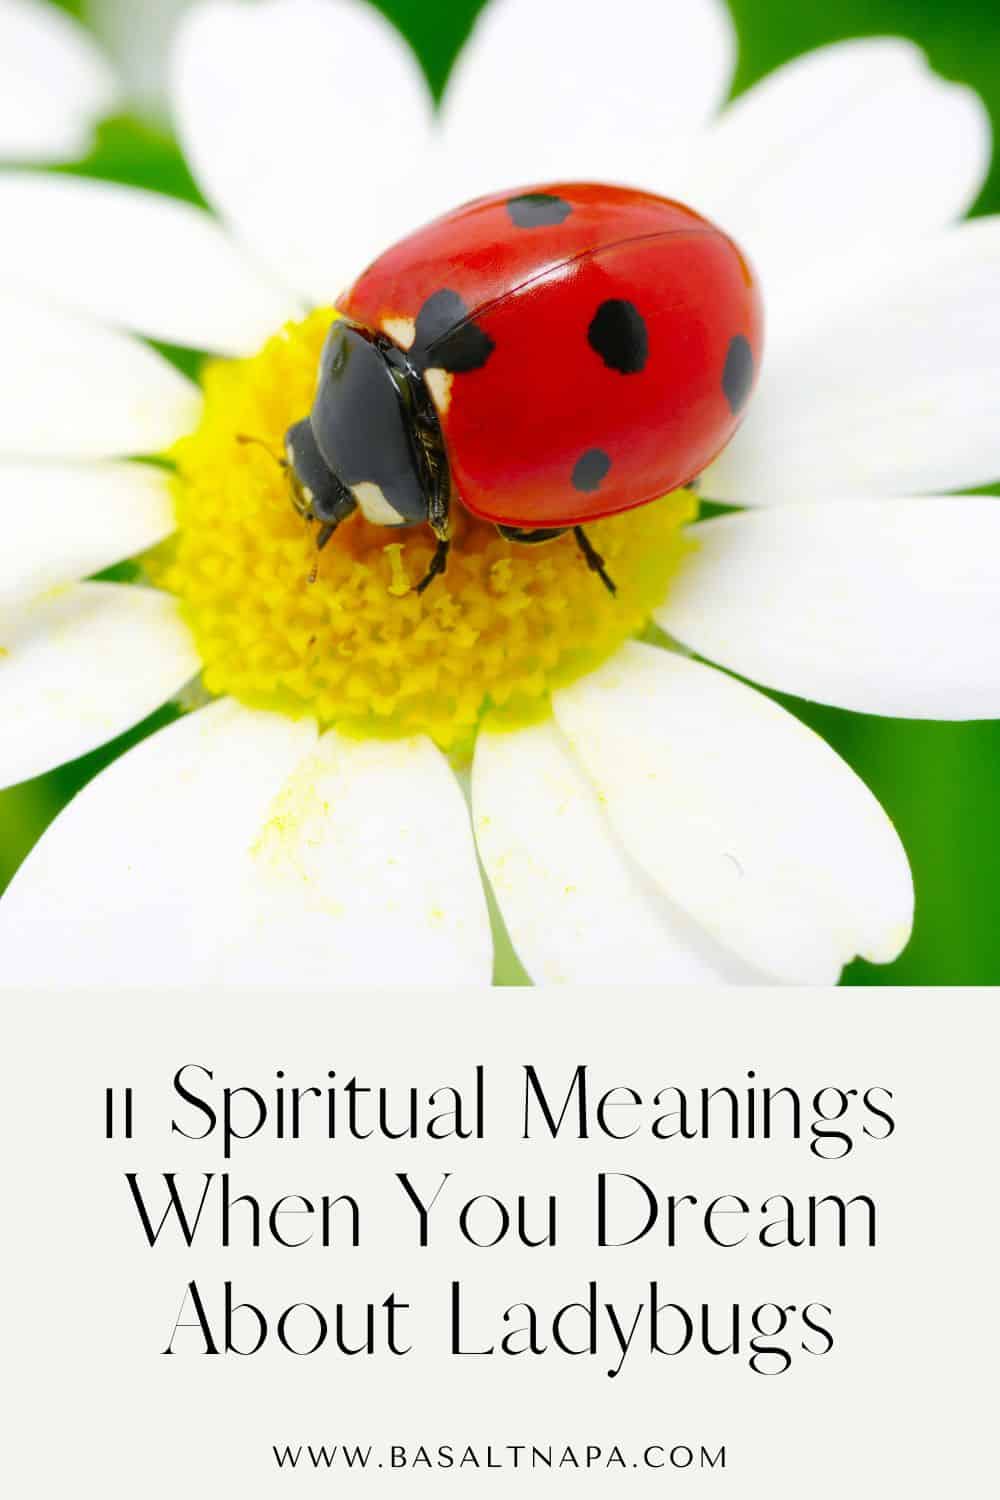 11 Spiritual Meanings When You Dream About Ladybugs